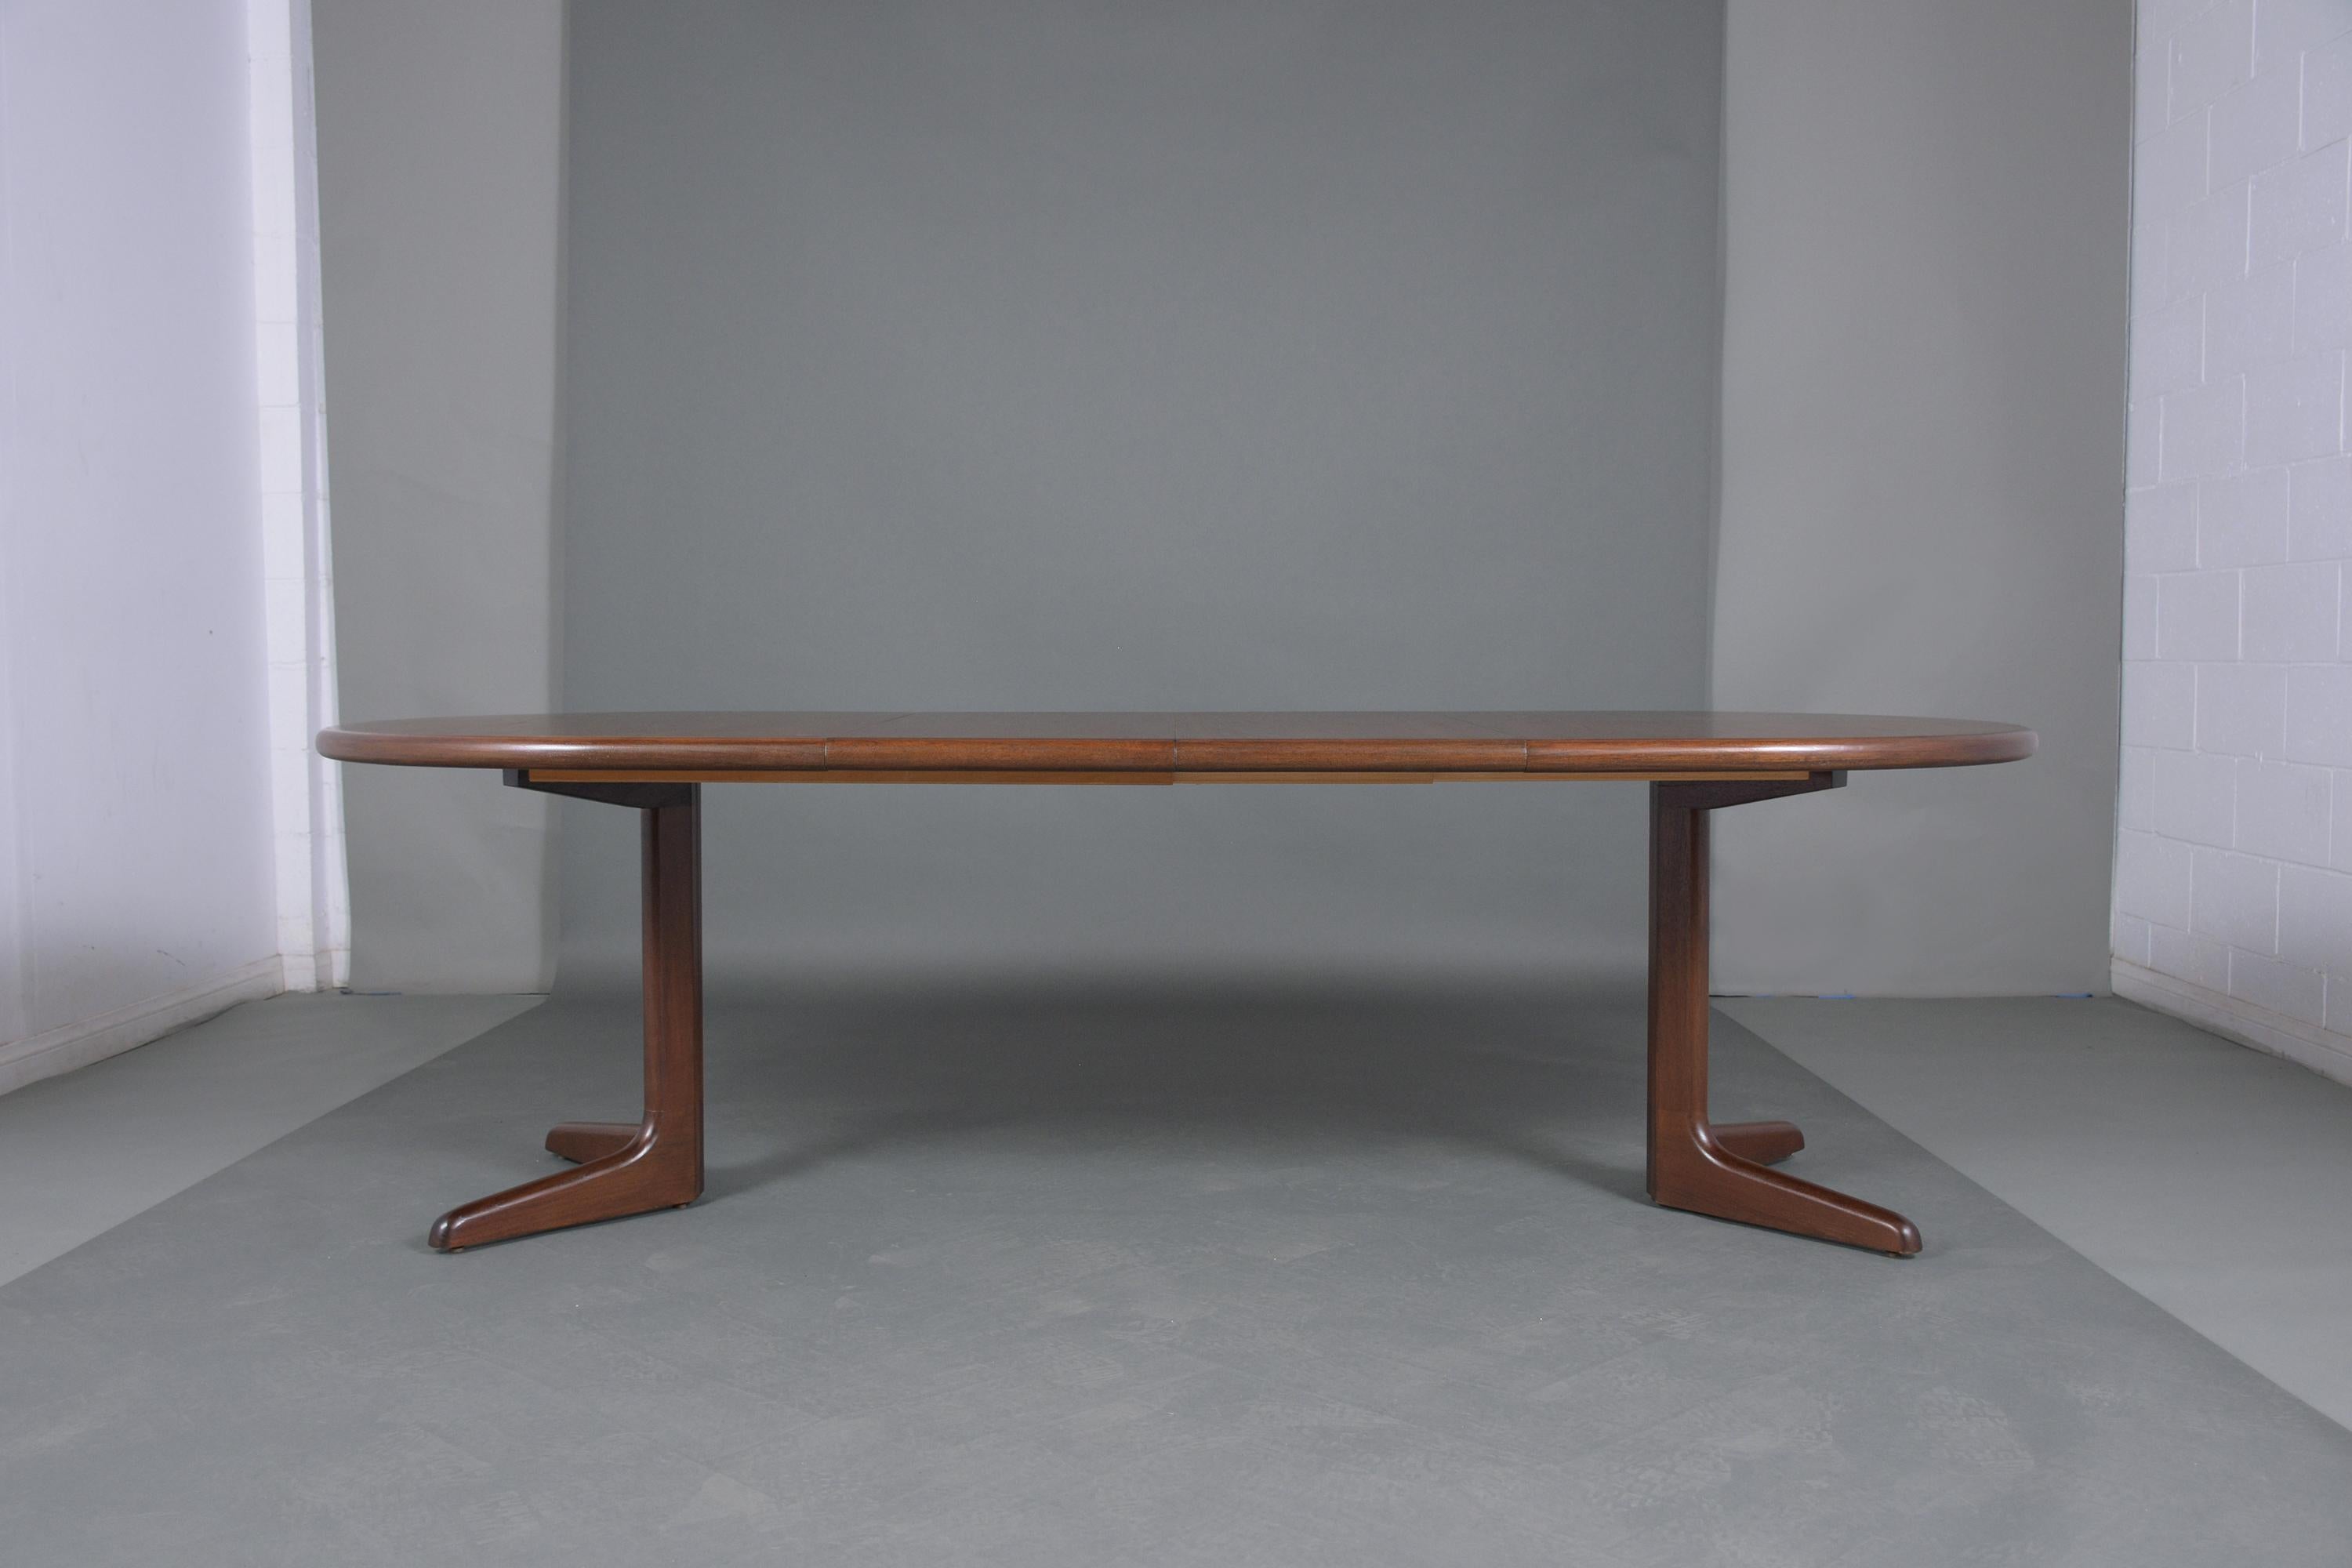 This Danish Mid-Century Modern dining table has been newly restored, is made out of teak wood, and has its natural walnut stain finish with a newly lacquered finish. This oval top table comes with two extra leaves that can be added/ removed with